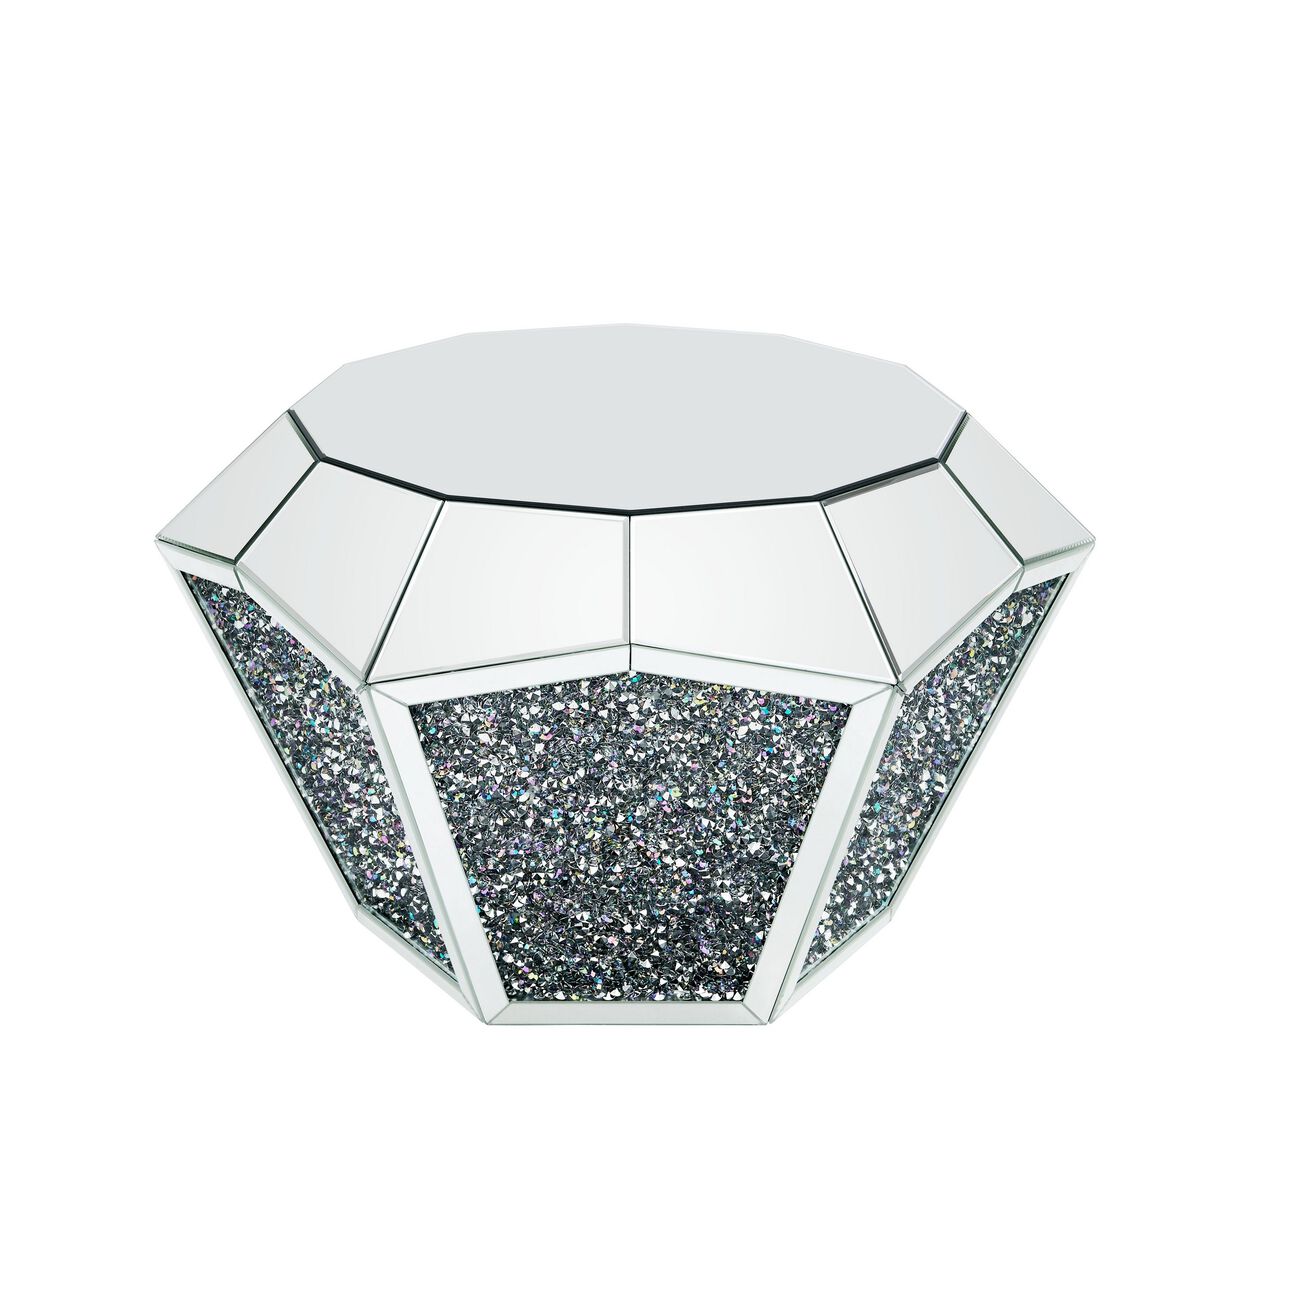 Mirror Octagonal Shape Coffee Table with Faux Diamond Inlays, Silver